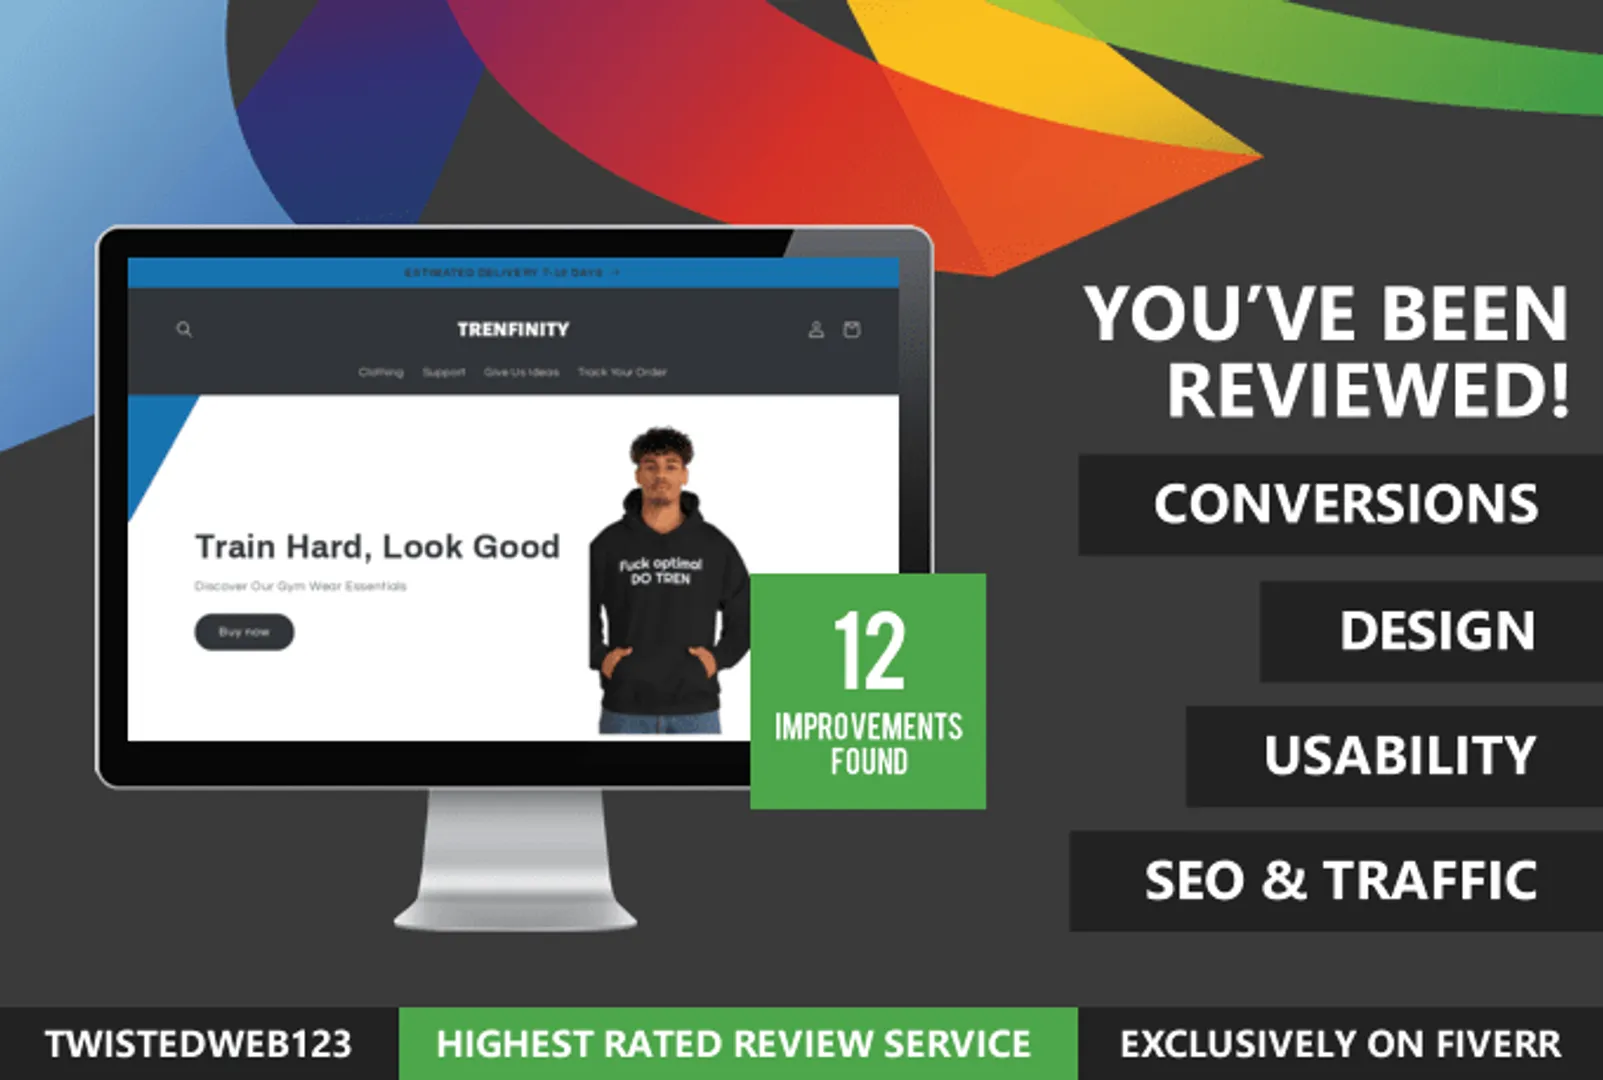 review and improve your website with 10 easy tips

Order Now : https://bit.ly/43PatlU